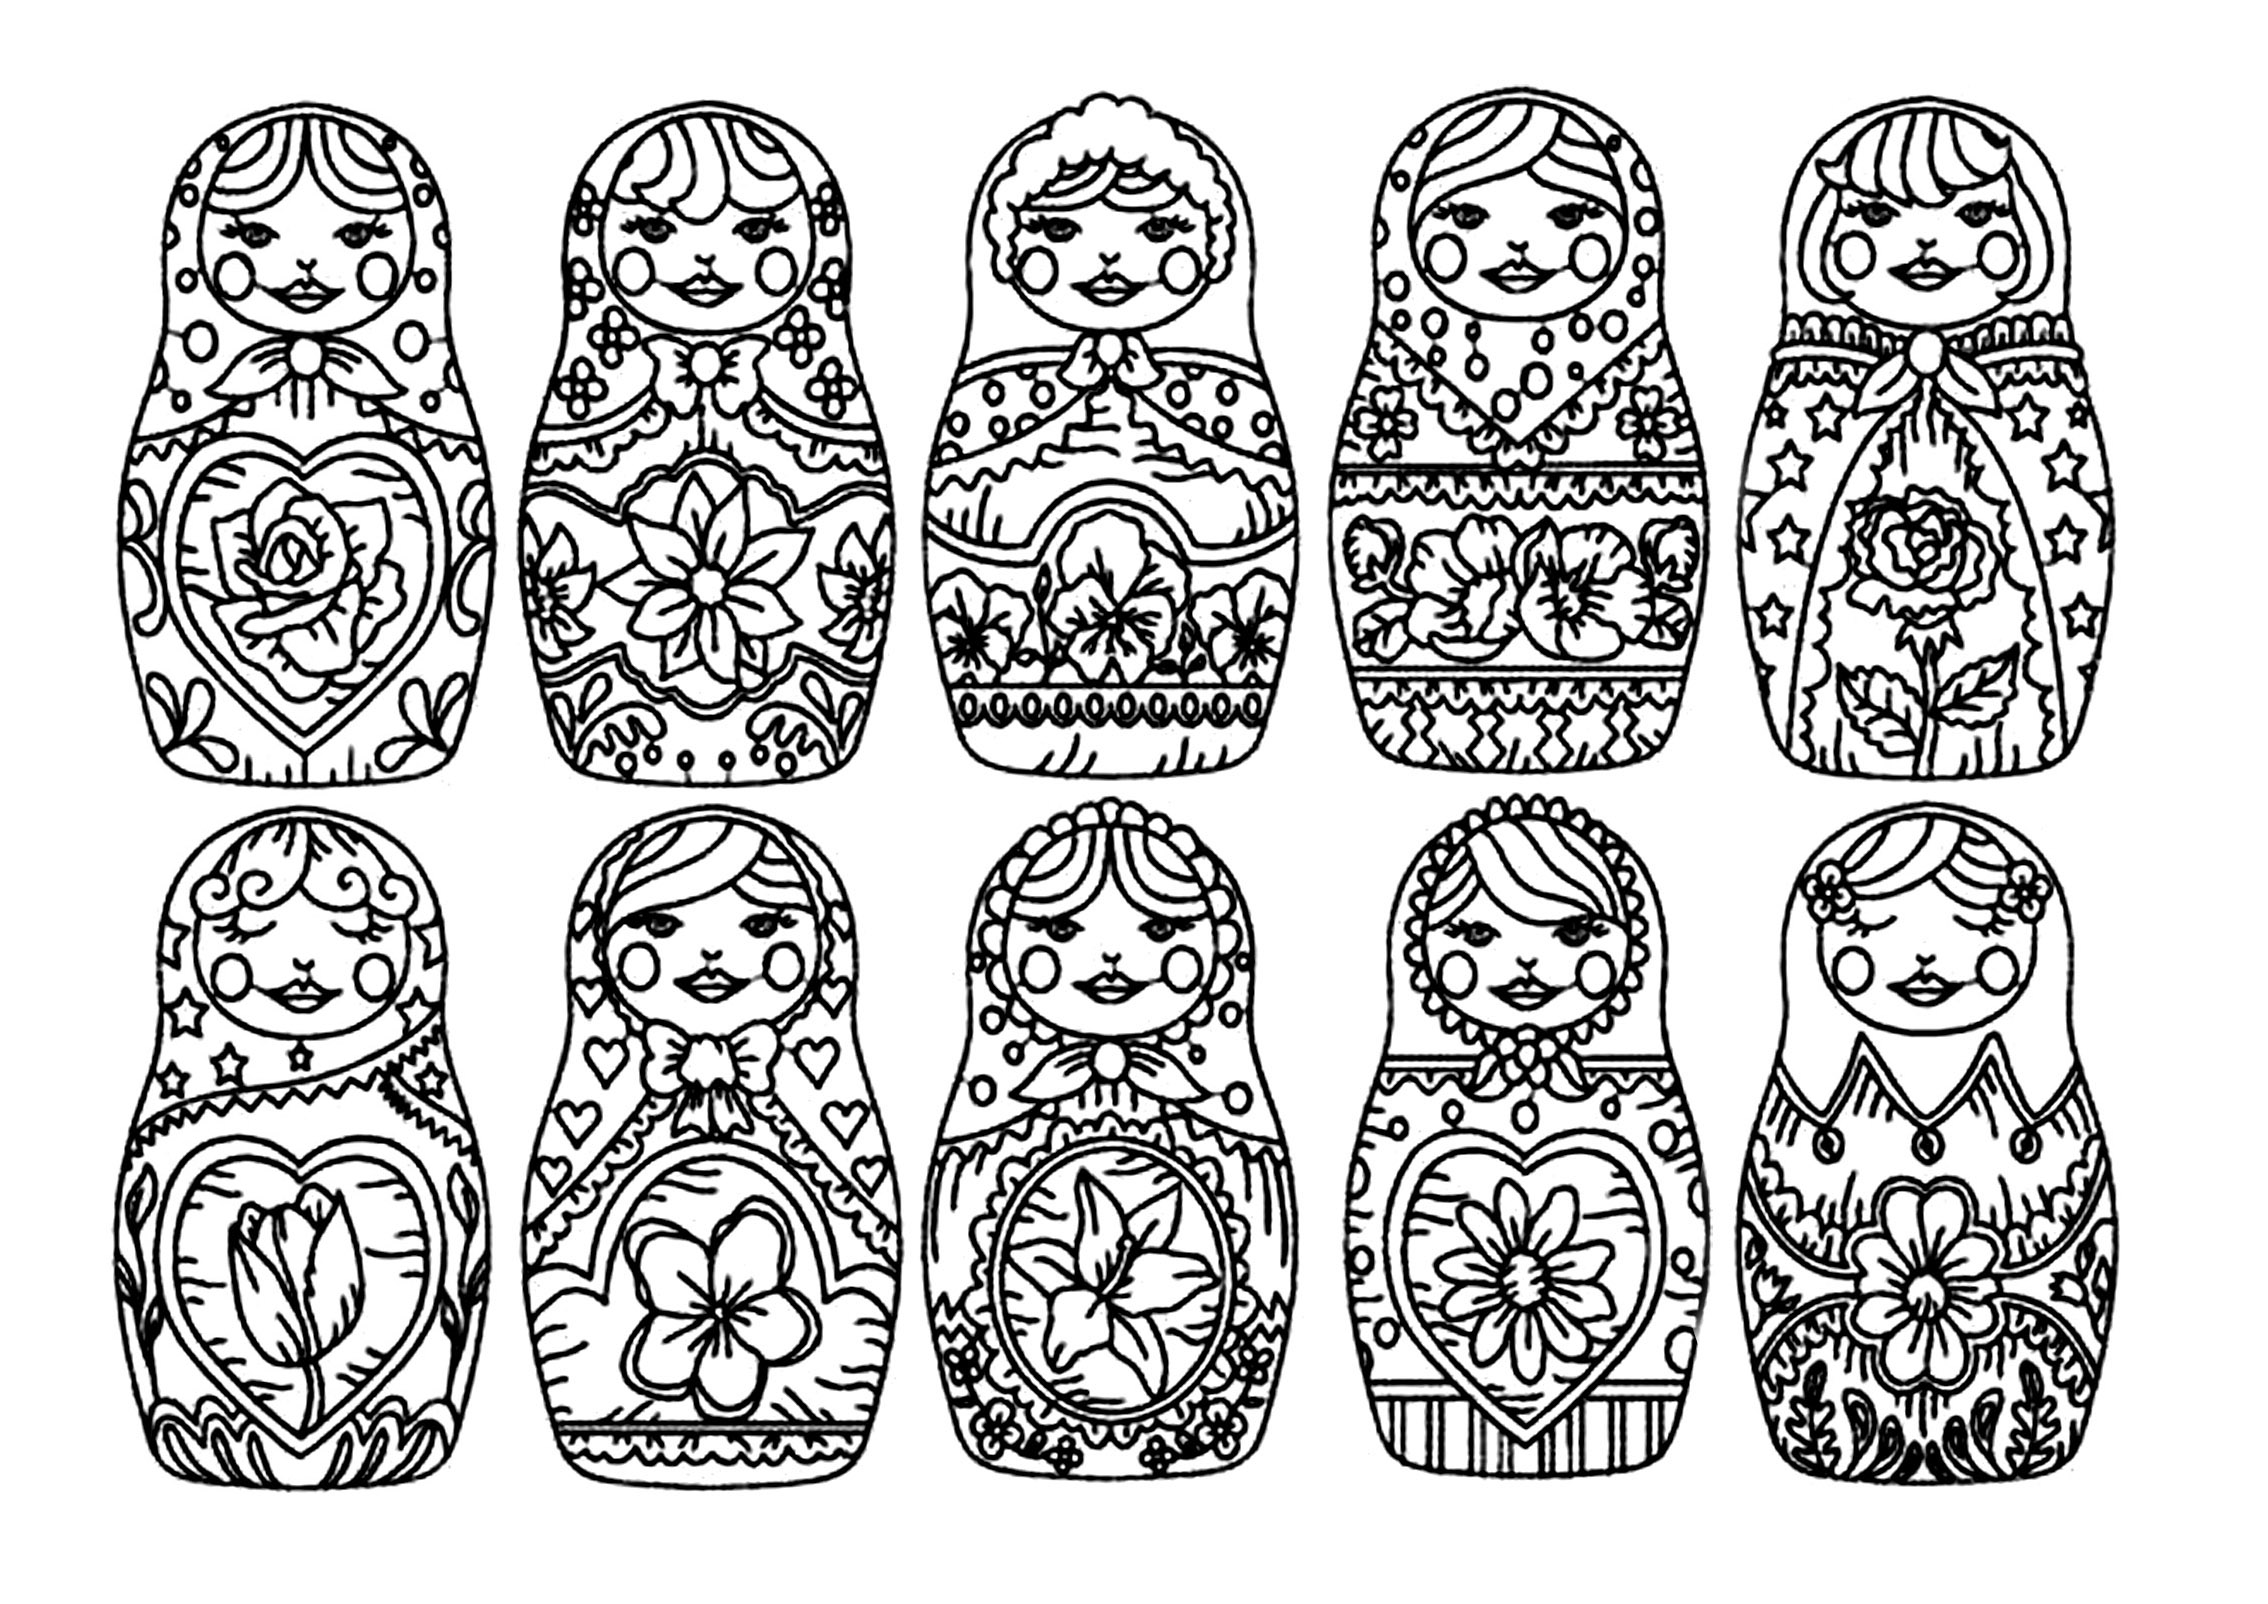 Russian dolls 1 - Image with : Russia